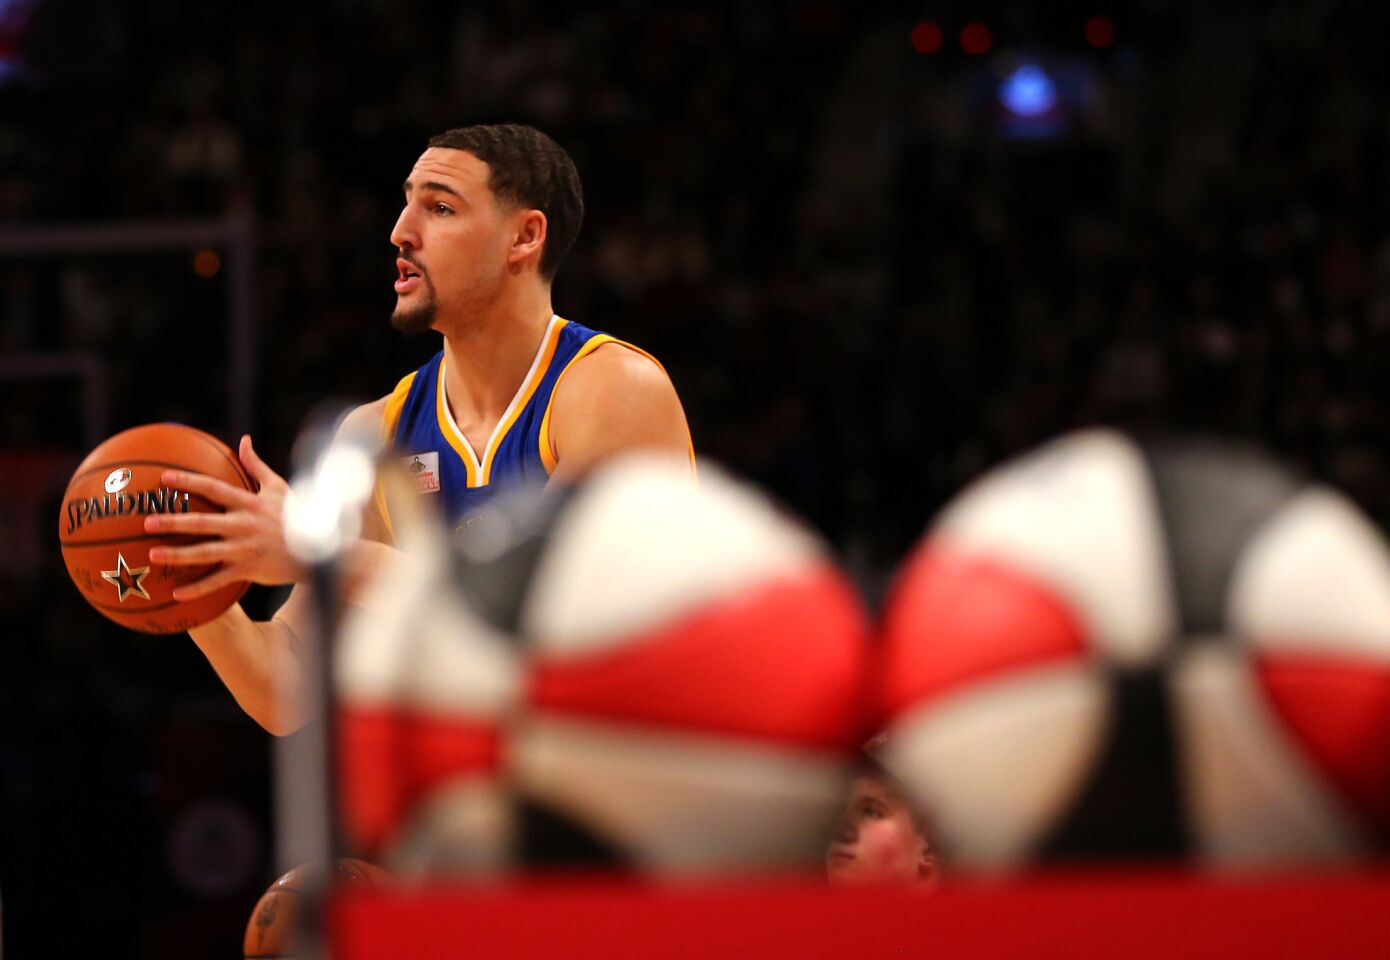 Golden State guard Klay Thompson takes aim during the Foot Locker Three-Point Contest on Saturday night.